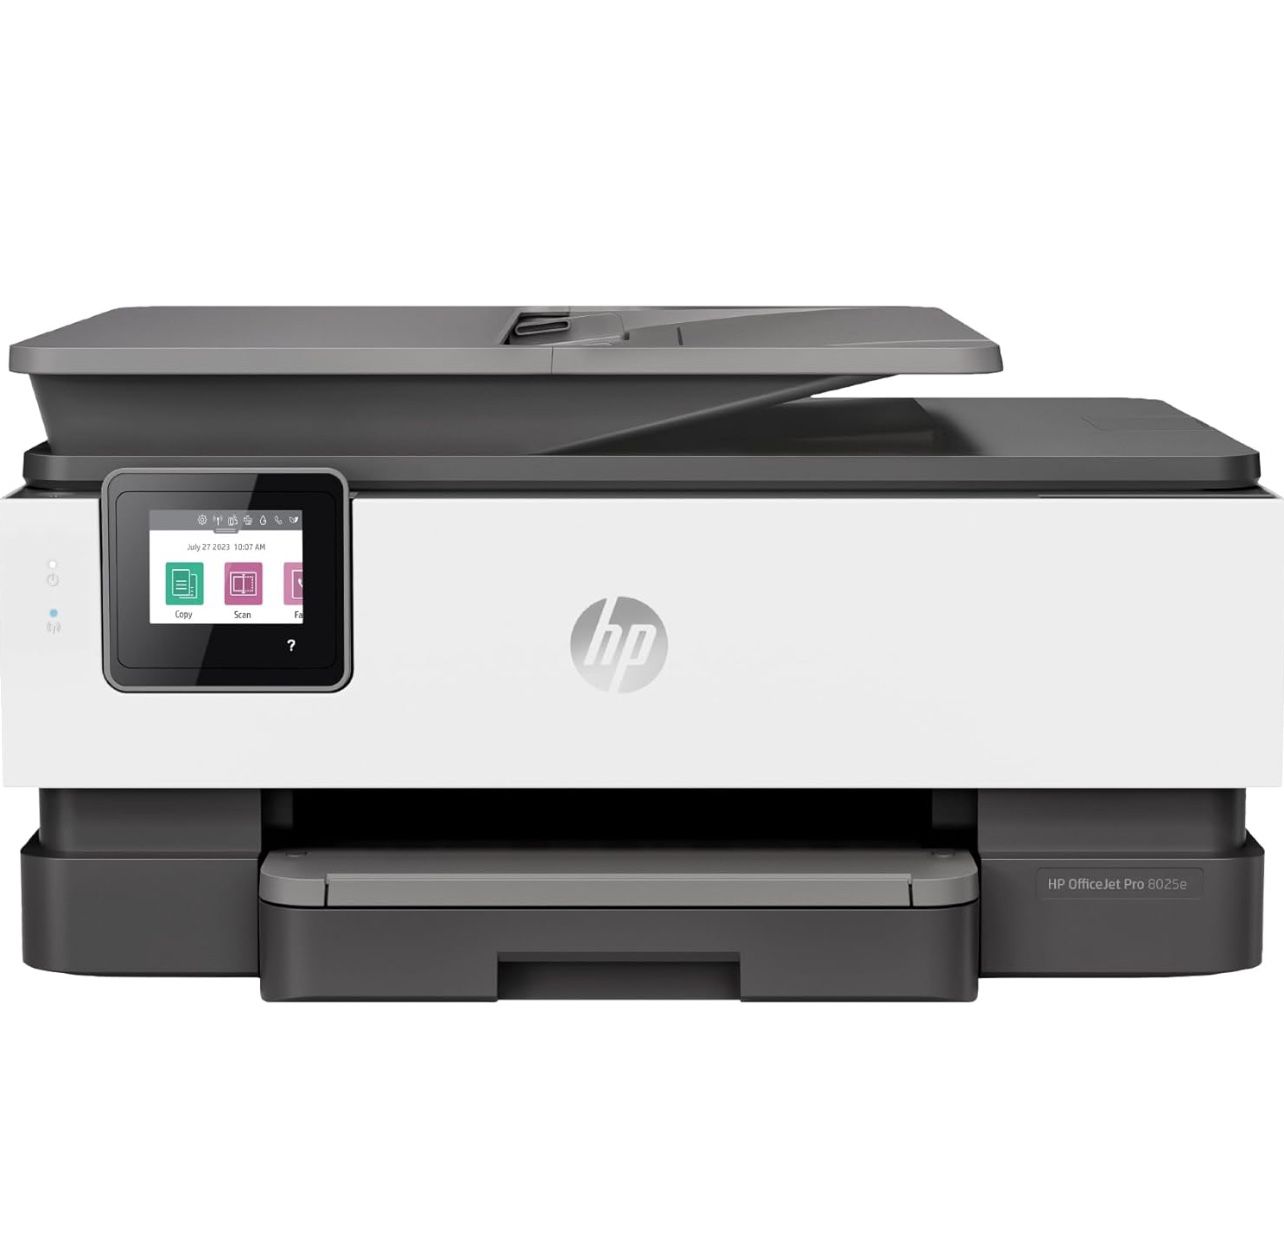 HP OfficeJet Pro 8025e Wireless Color All-in-One